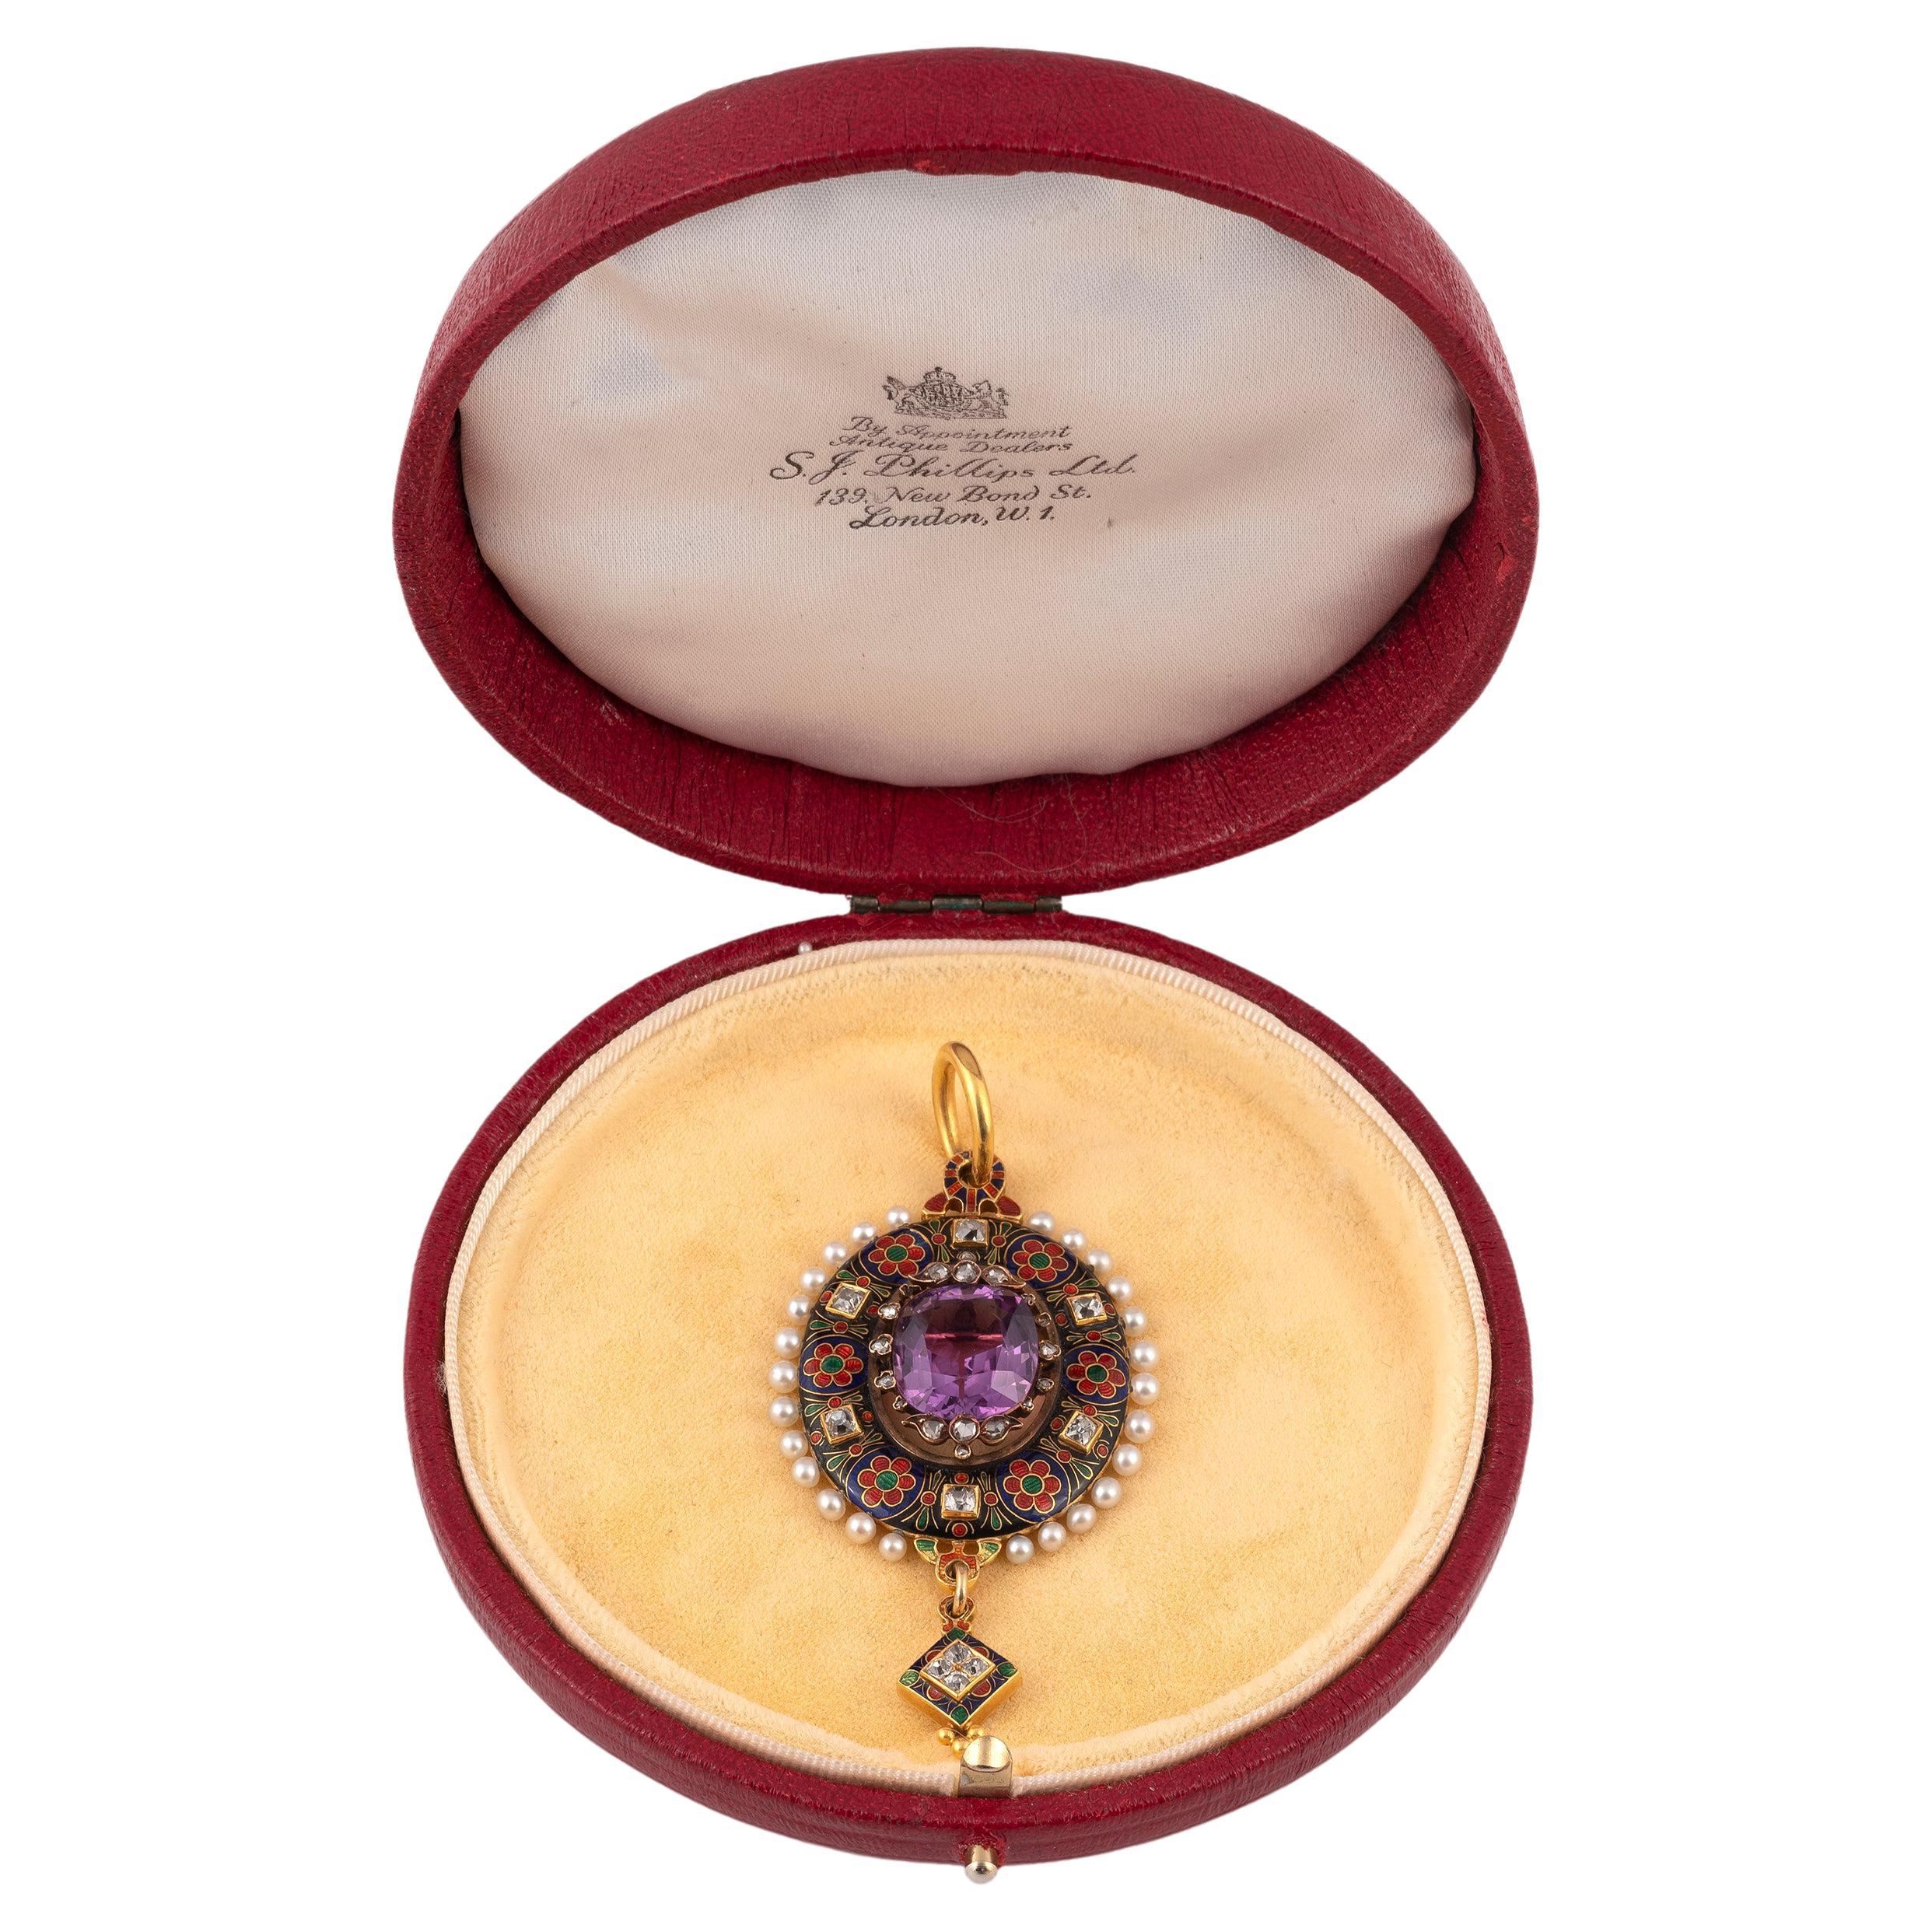 An Holbein style amethyst, diamond, enamel, natural pearl and gold pendant, circa 1865
It is oval, carrying in its center an amethyst in a set, each punctuated by a rose-cut diamond. The entourage is enamelled in polychrome cloisonné, also enhanced